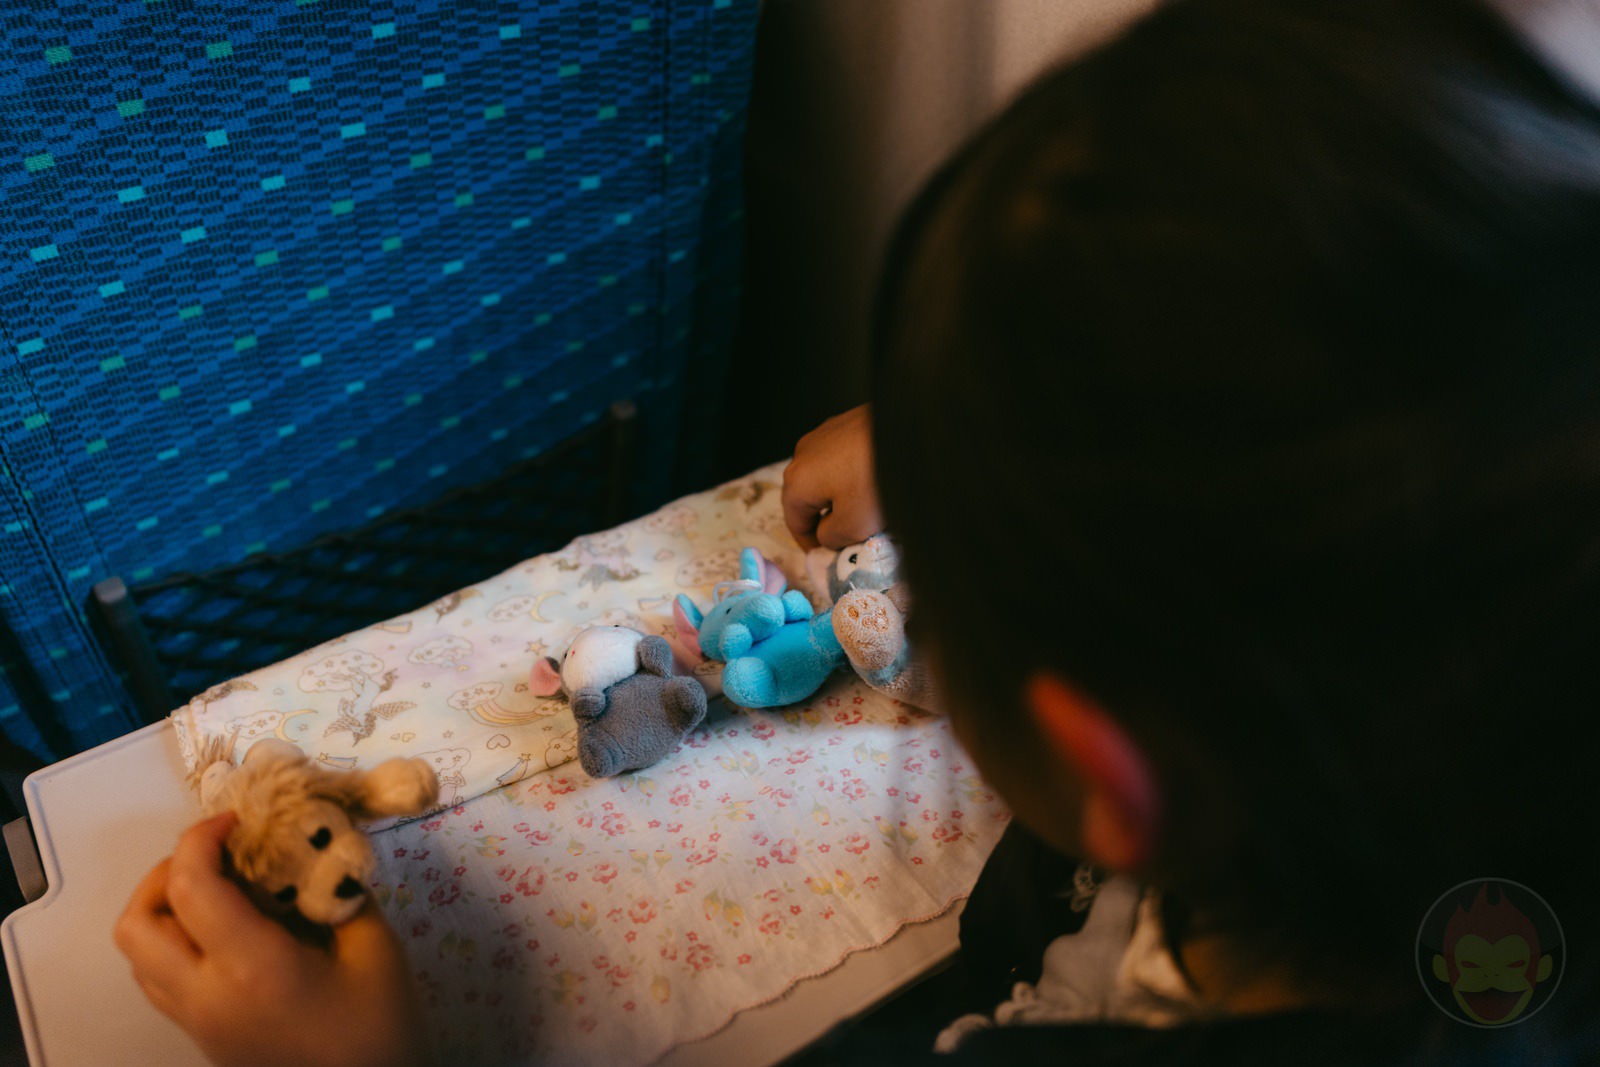 Daddy-and-two-daughters-go-on-a-shinkansen-trip-13.jpg